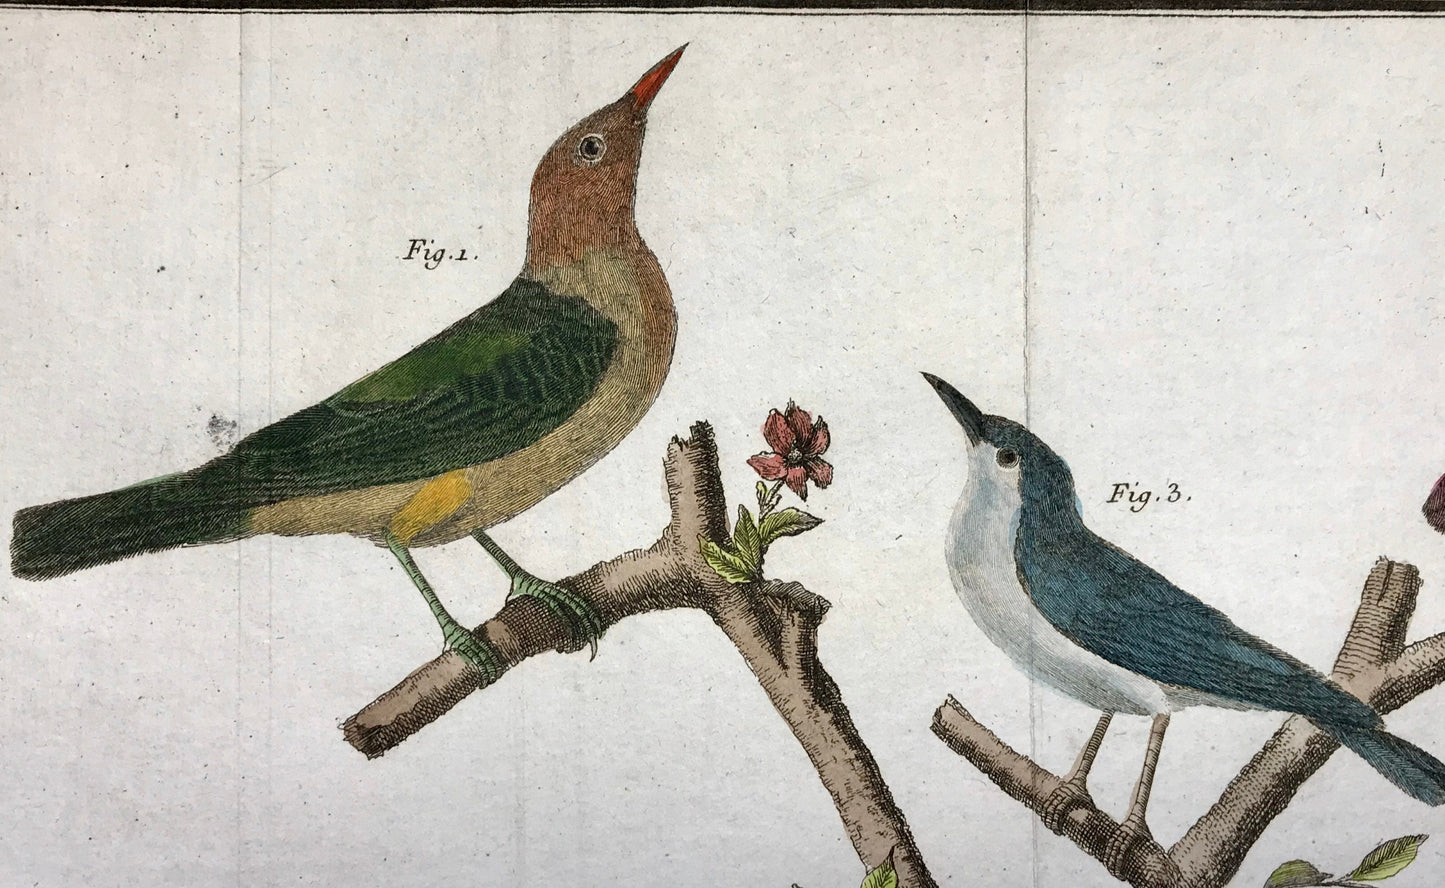 A Copper Plate Engraving of Pipit Birds and Fig-eaters. By Francois-Nicholas Martinet. Hand coloured. Dated 1770. 25 x 34.7 cms. .